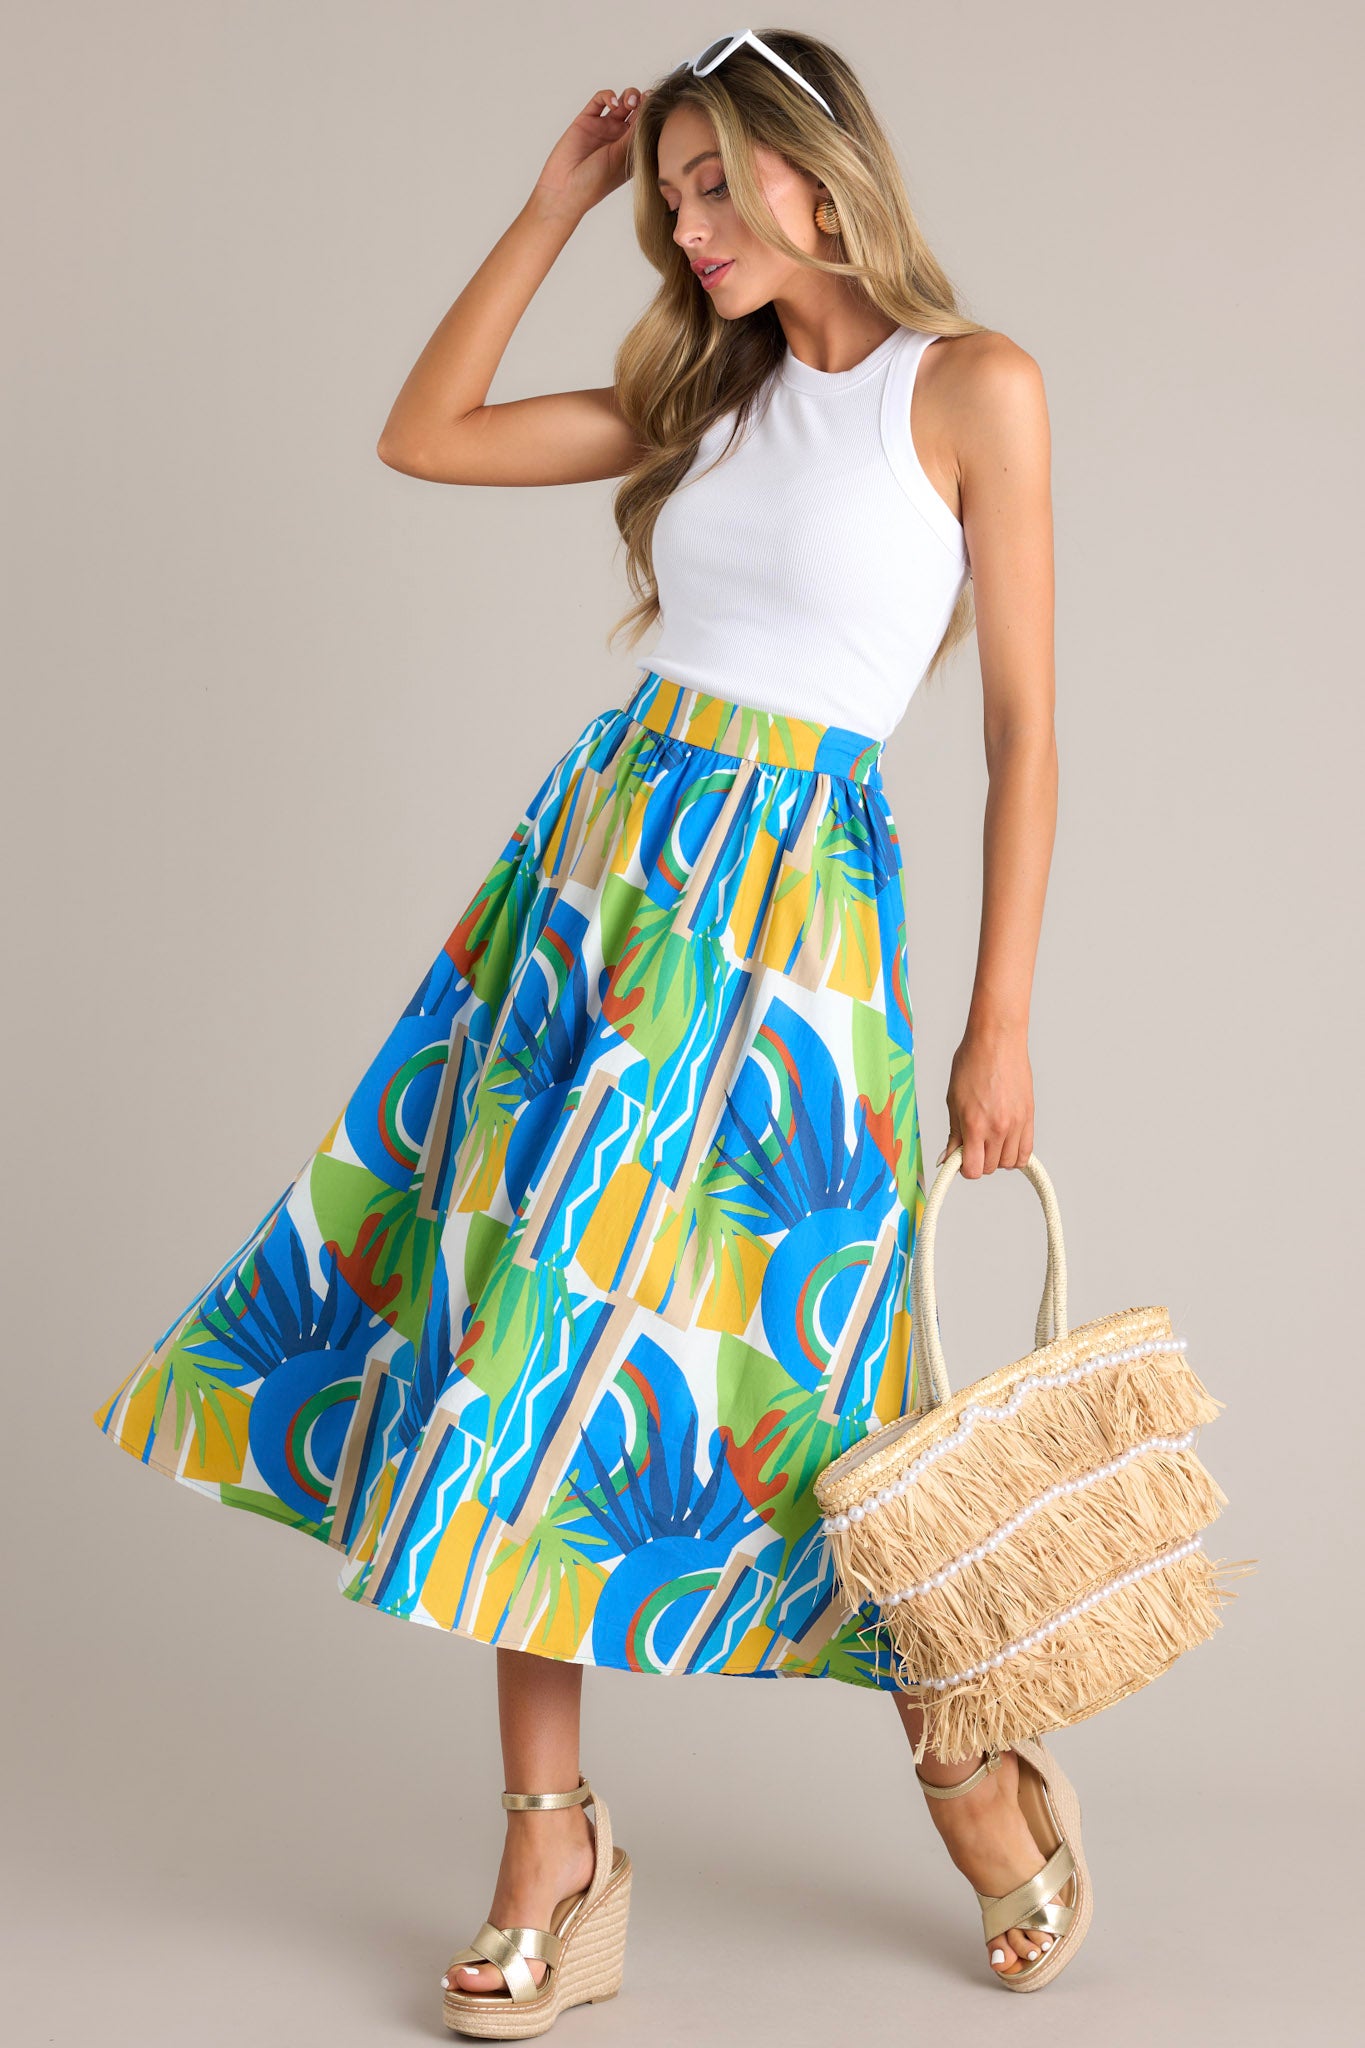 This blue midi skirt features a high waisted design, a thick waistband, a discrete side zipper, functional hip pockets, and a flowing silhouette.